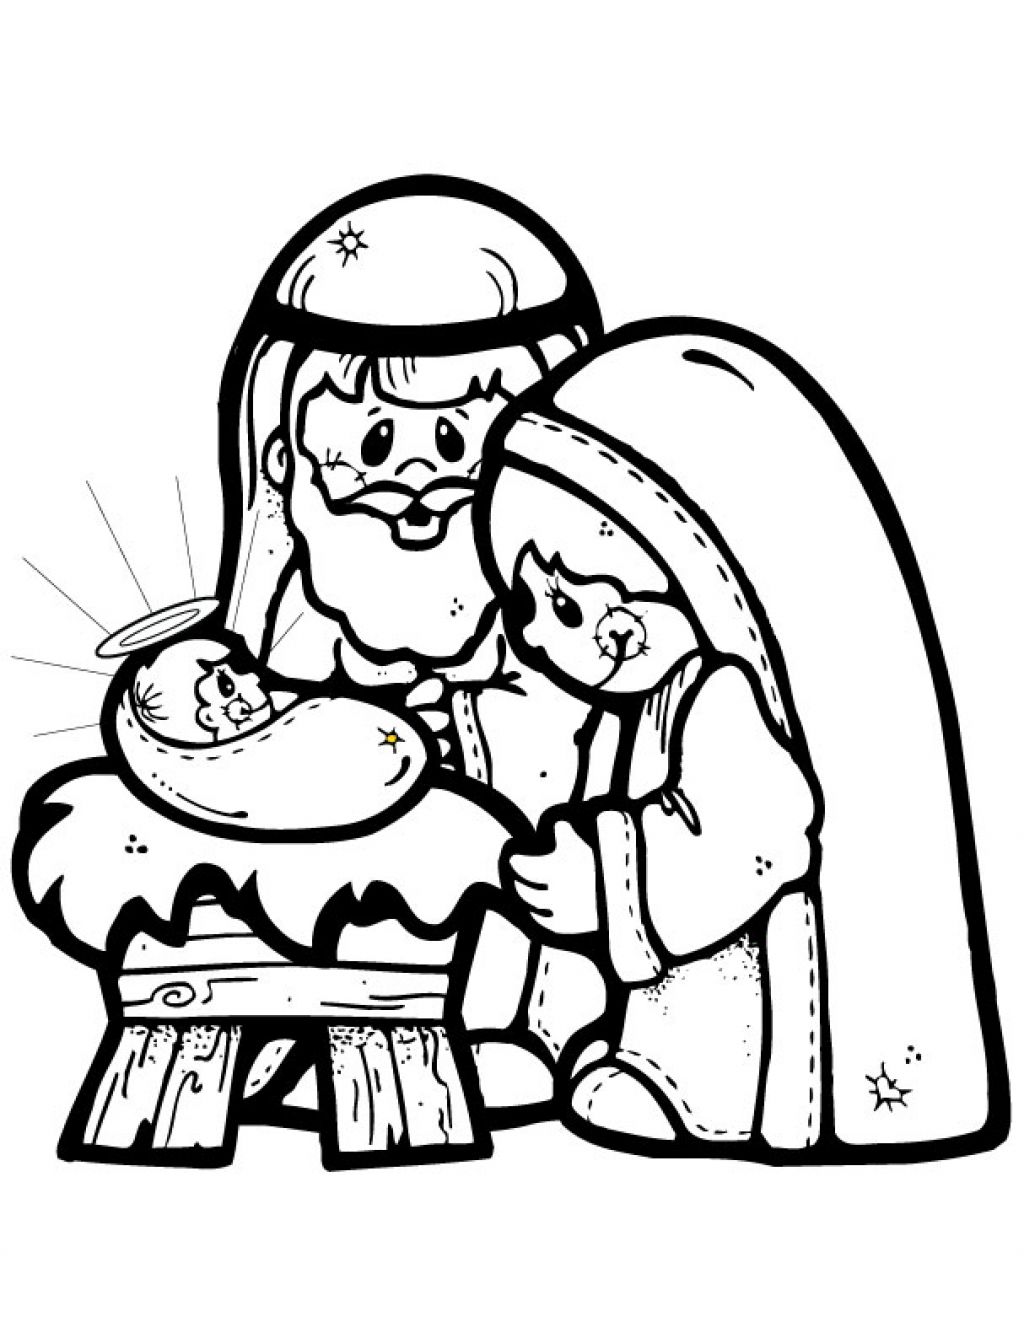 Nativity scene coloring page - Coloring Pages  Pictures - IMAGIXS